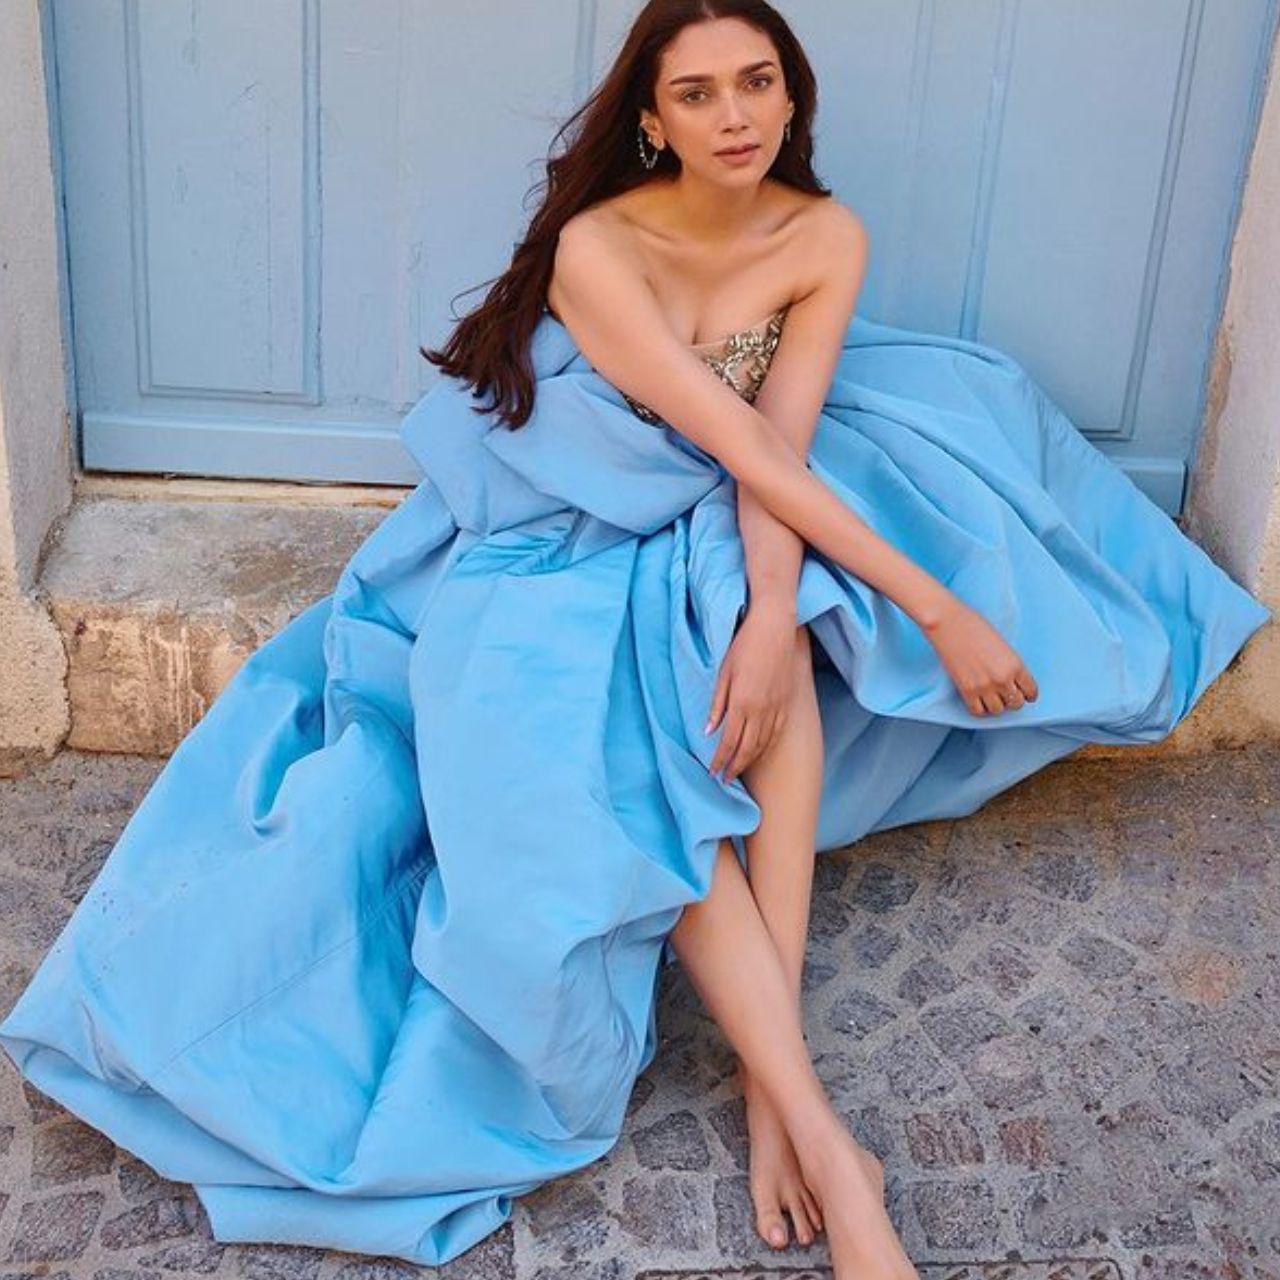 Aditi Rao's French glamor is emerging in the blue gown.  This look of Aditi is from Cannes Festival.  Her minimal accessories complement the look.  The actress wore subtle makeup.